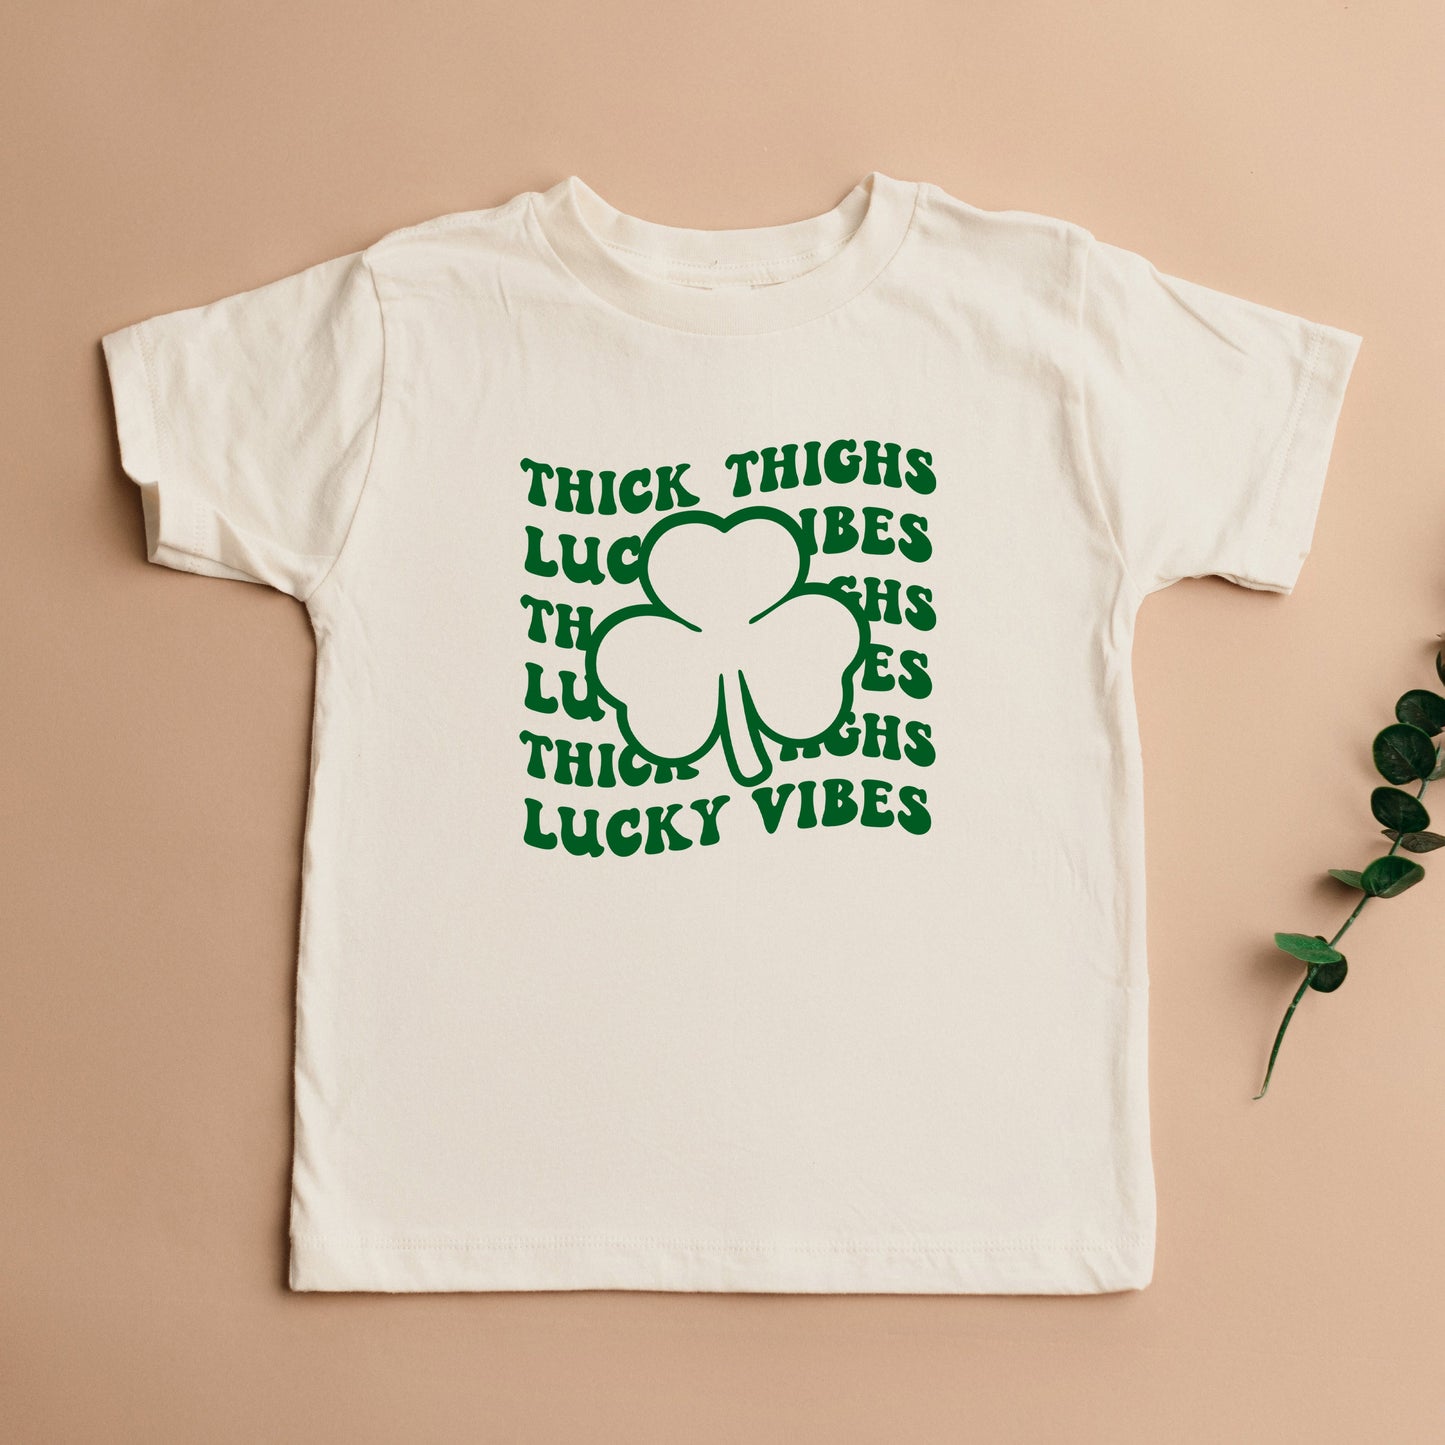 Thick Thighs Lucky Vibes | Toddler Short Sleeve Crew Neck